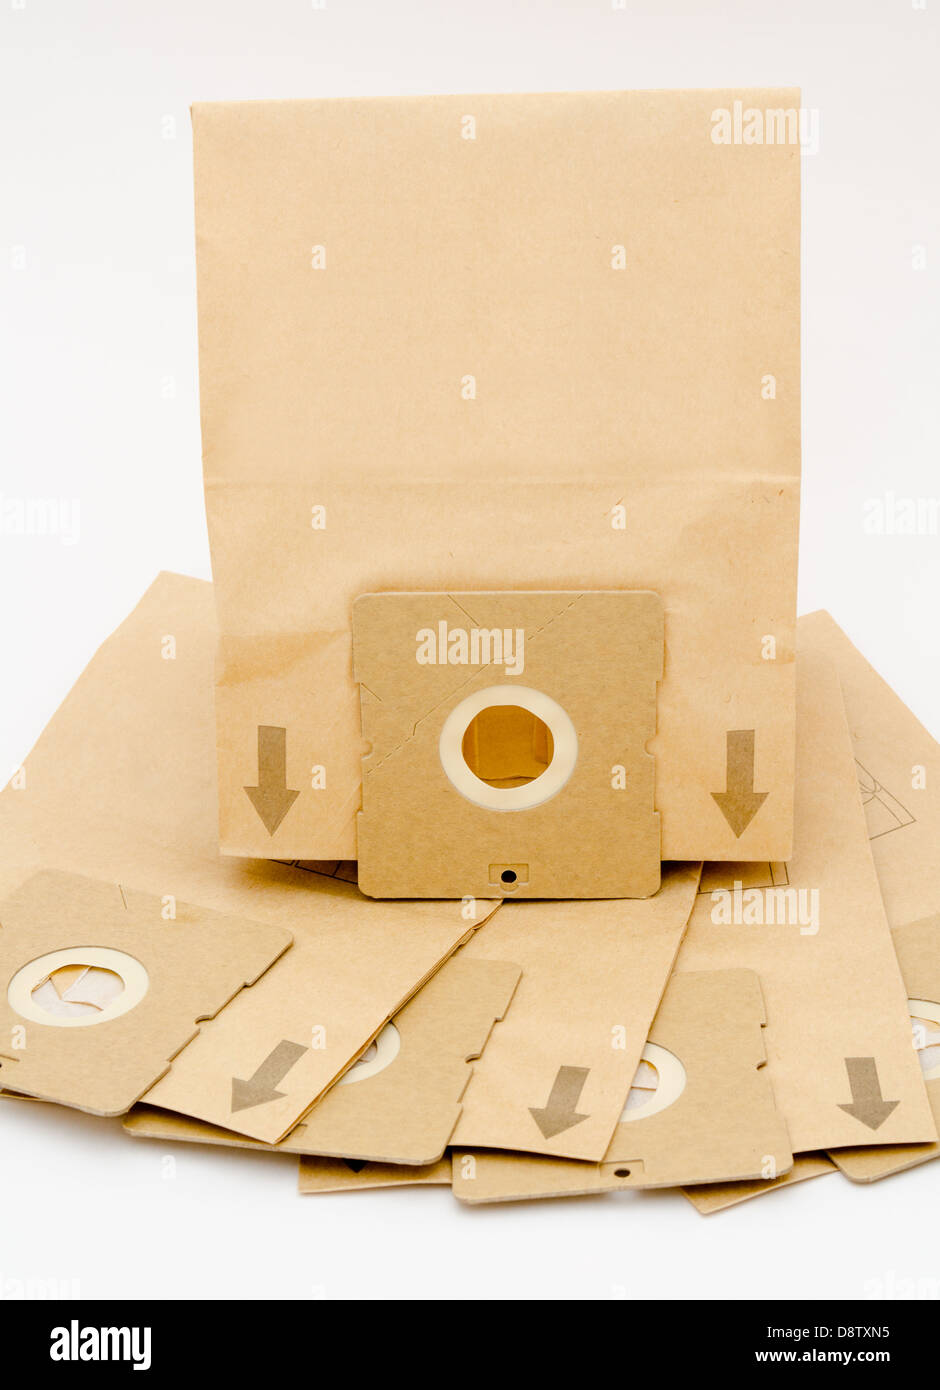 paper dust bags for vacuum cleaner Stock Photo